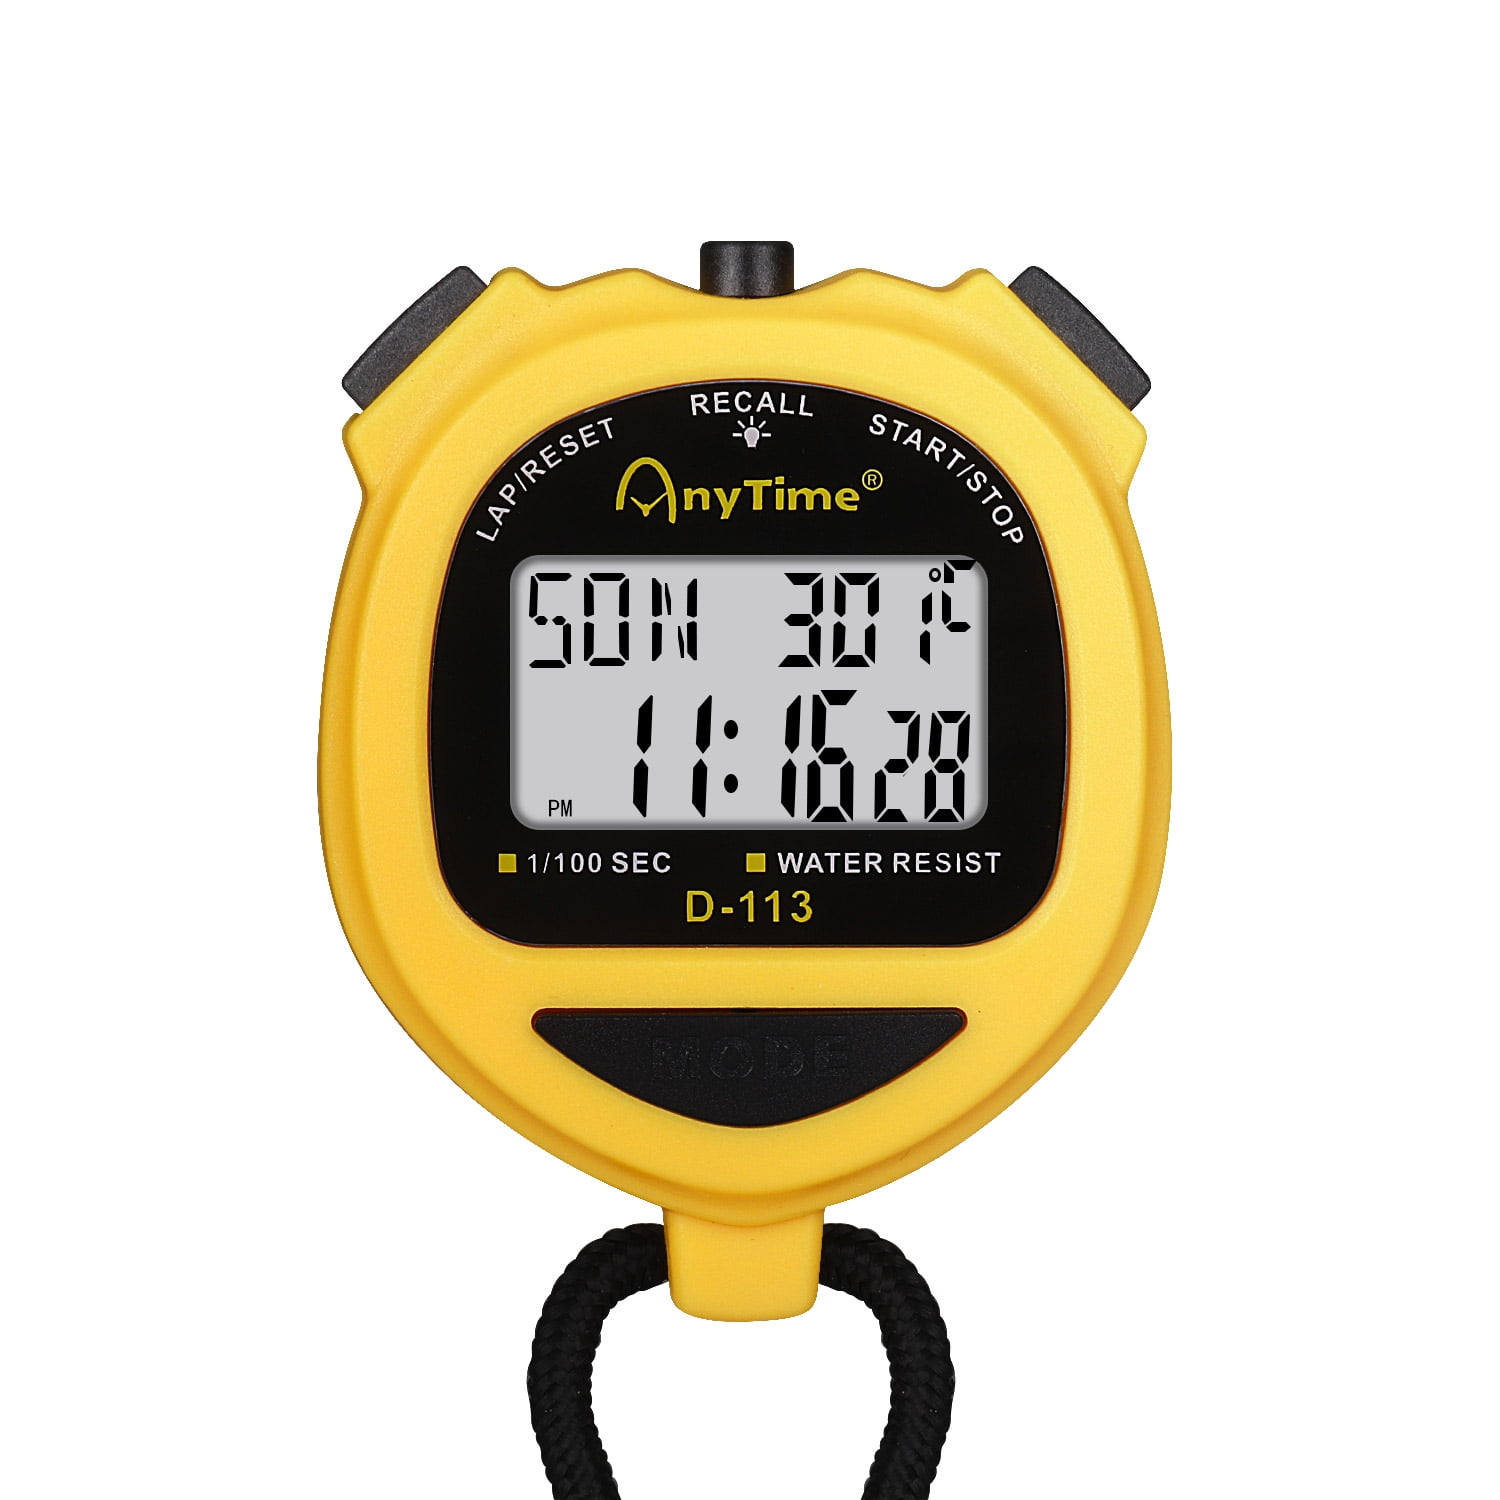  Sports Stopwatch, Countdown Timer CR-2032 Button